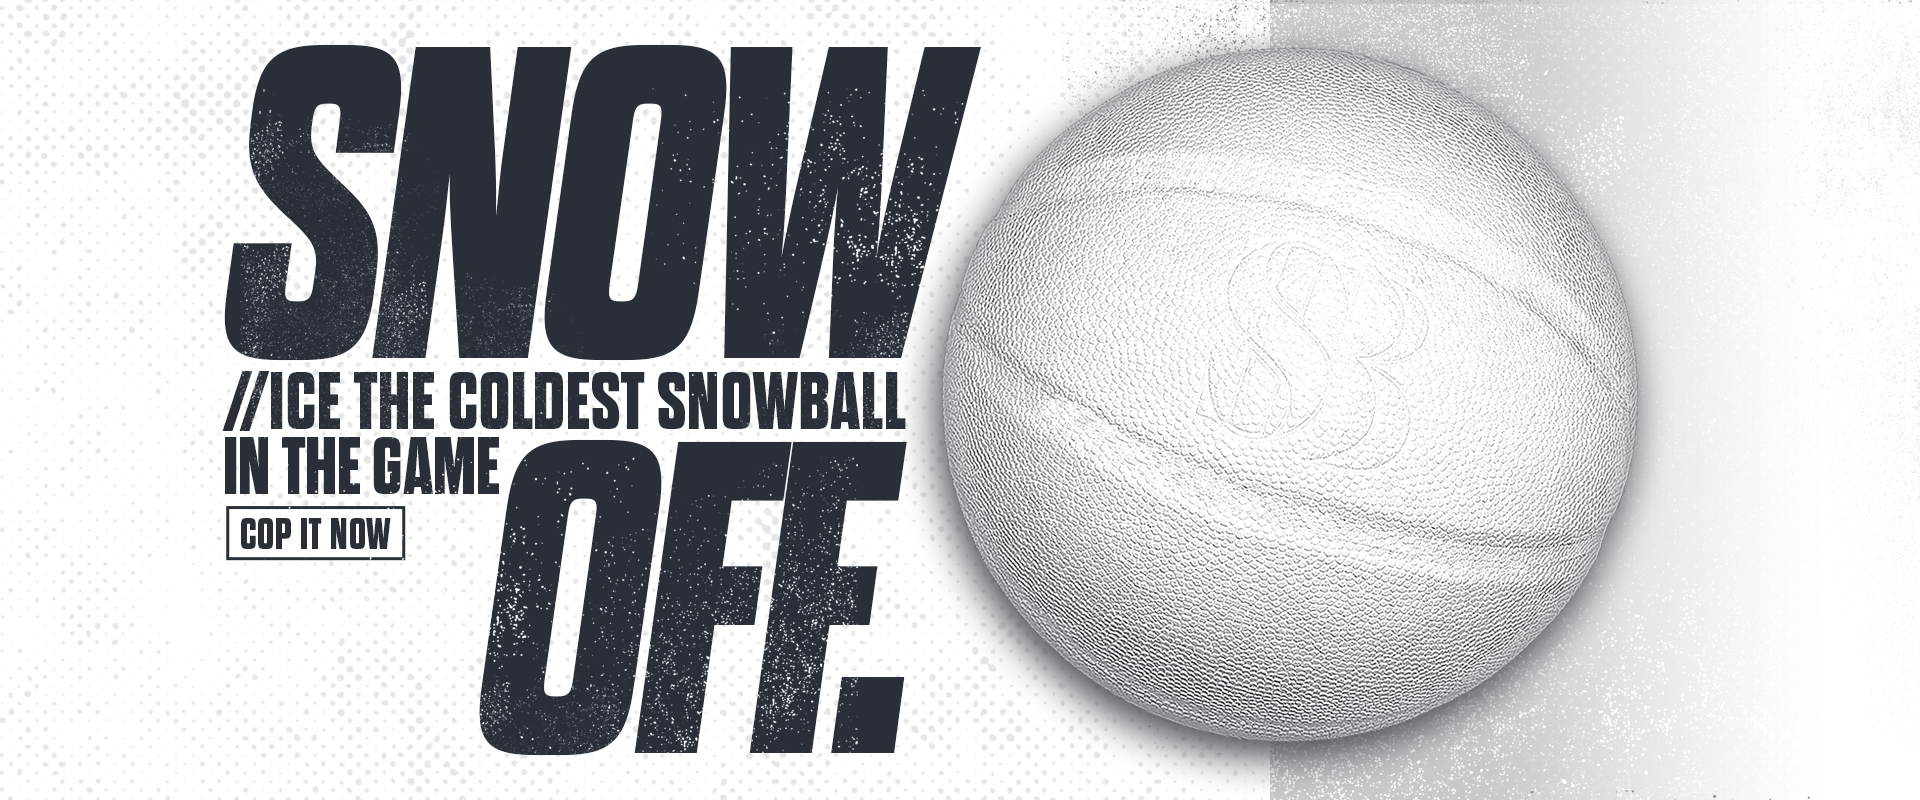 SNOW BALL THE COLDEST BASKEBTALL  IN THE GAME